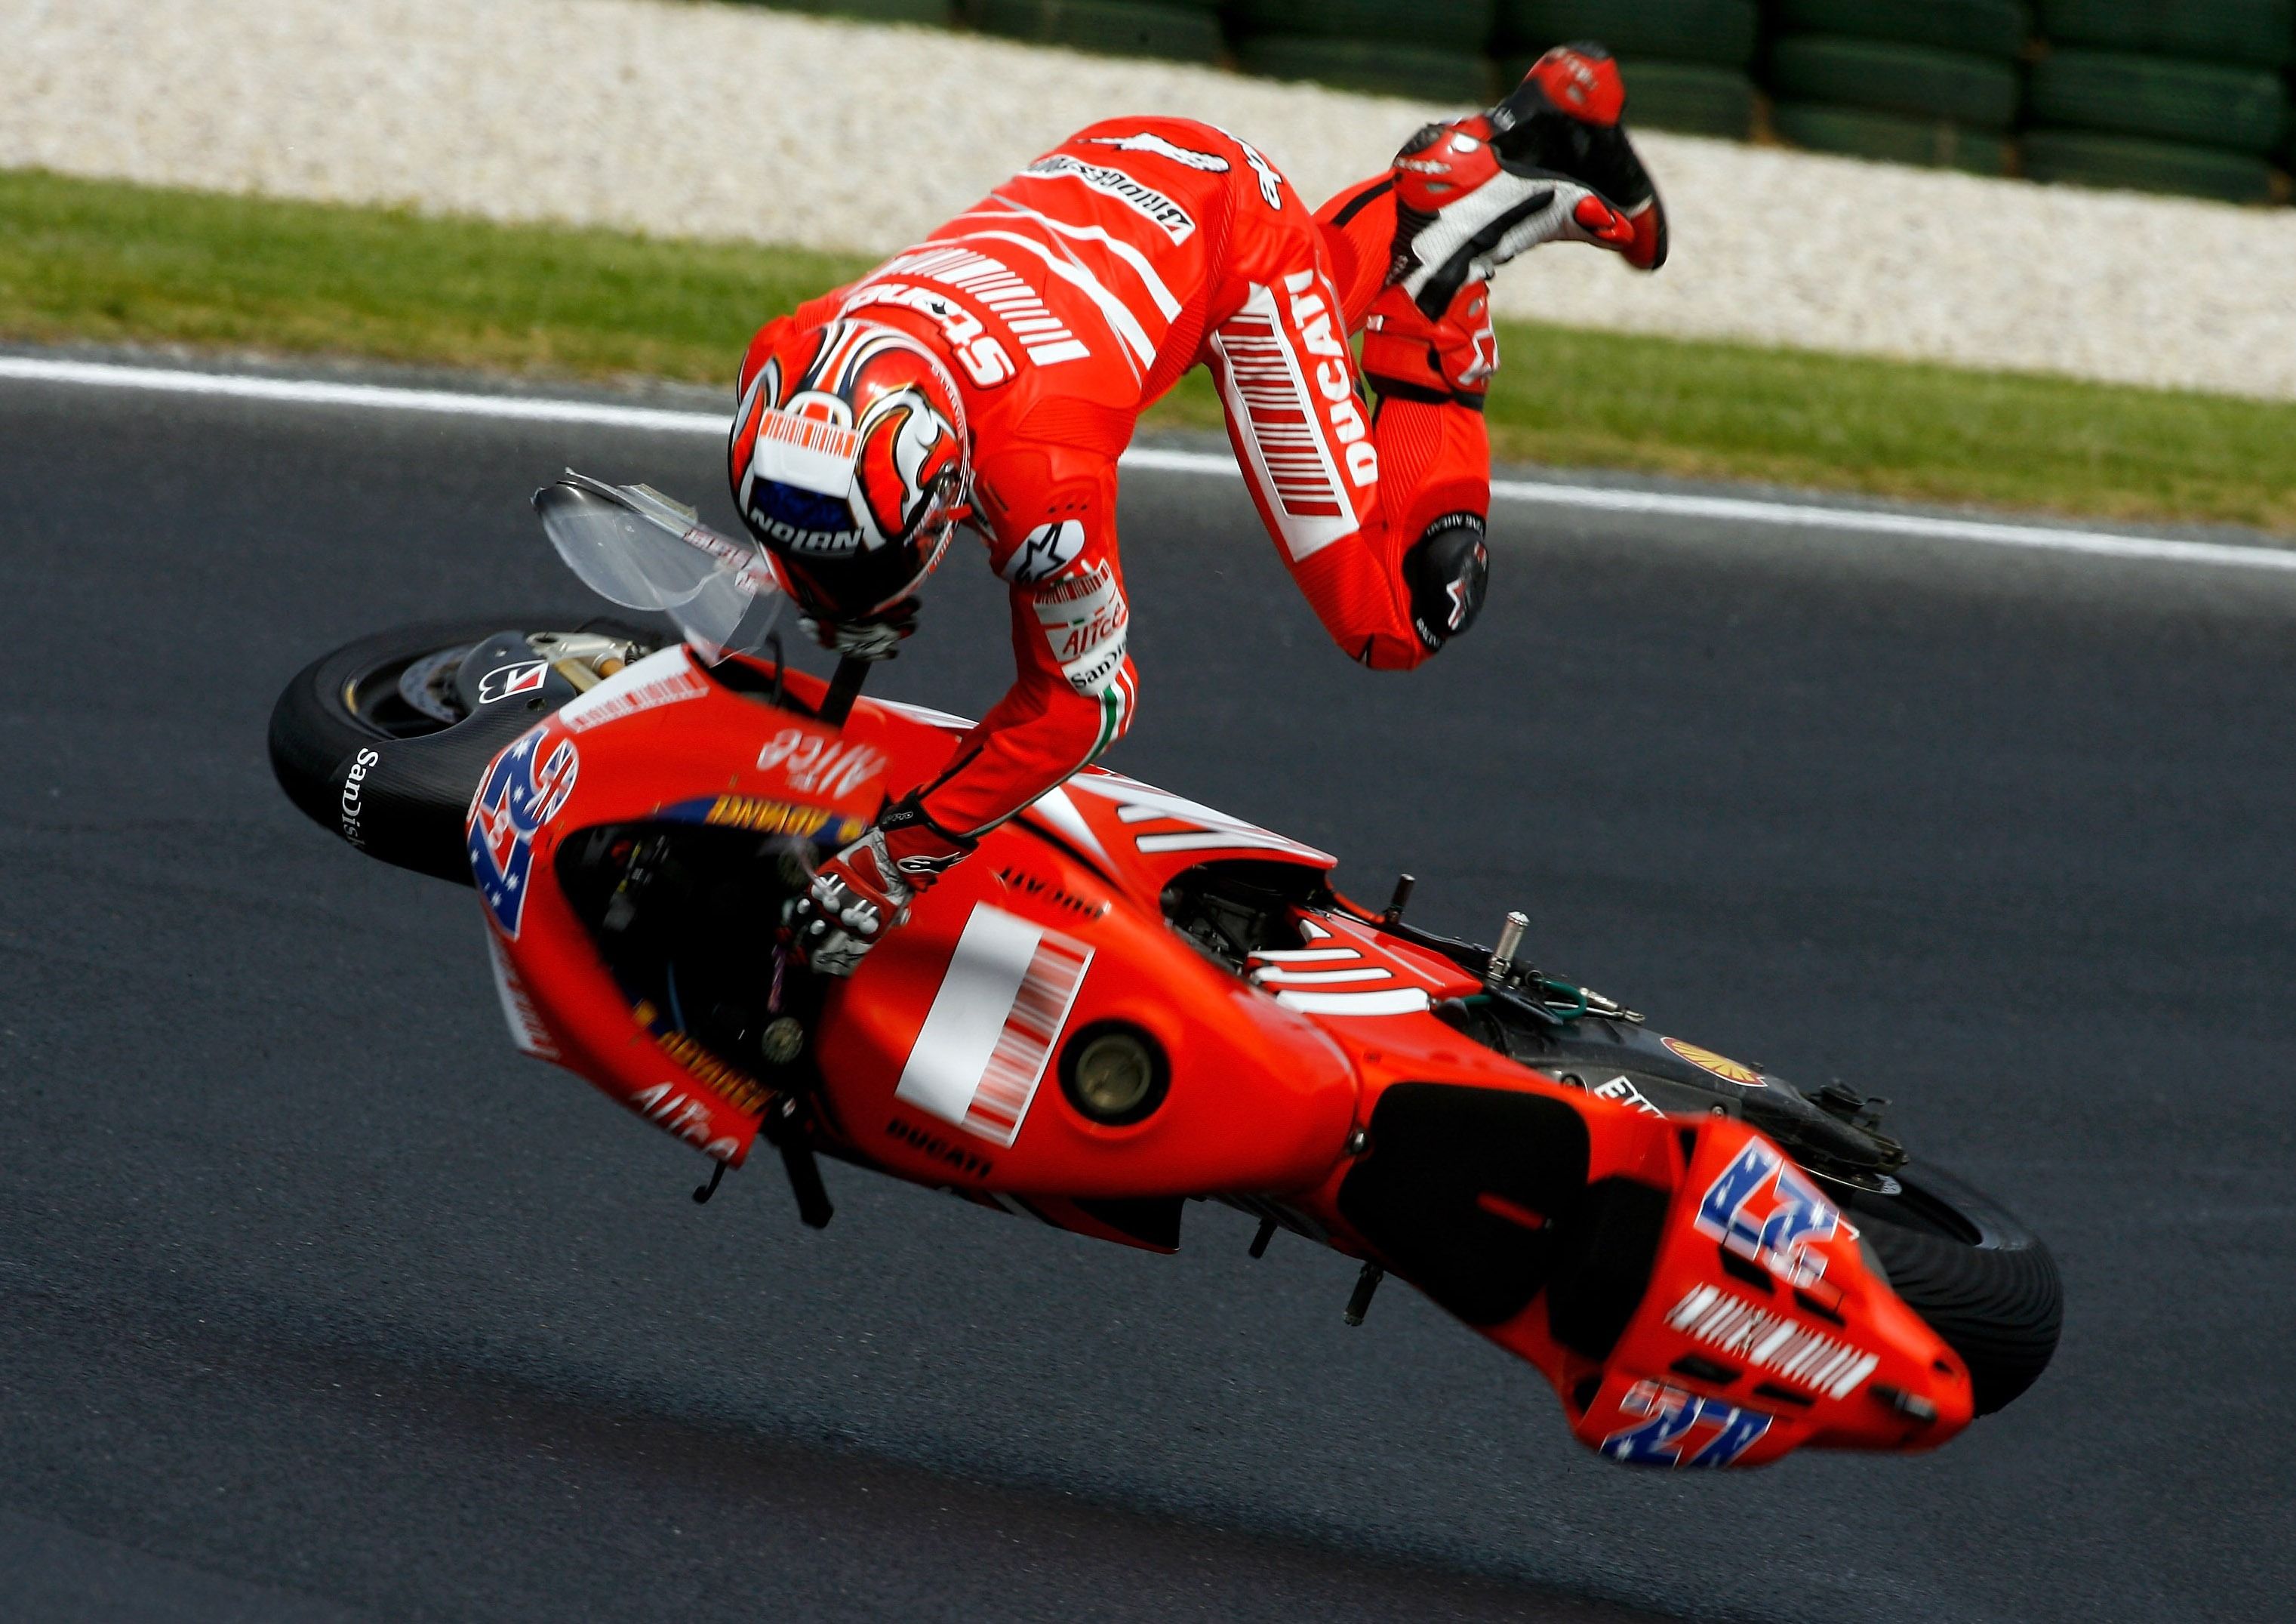 Rider falls from a red Ducati racing motorbike